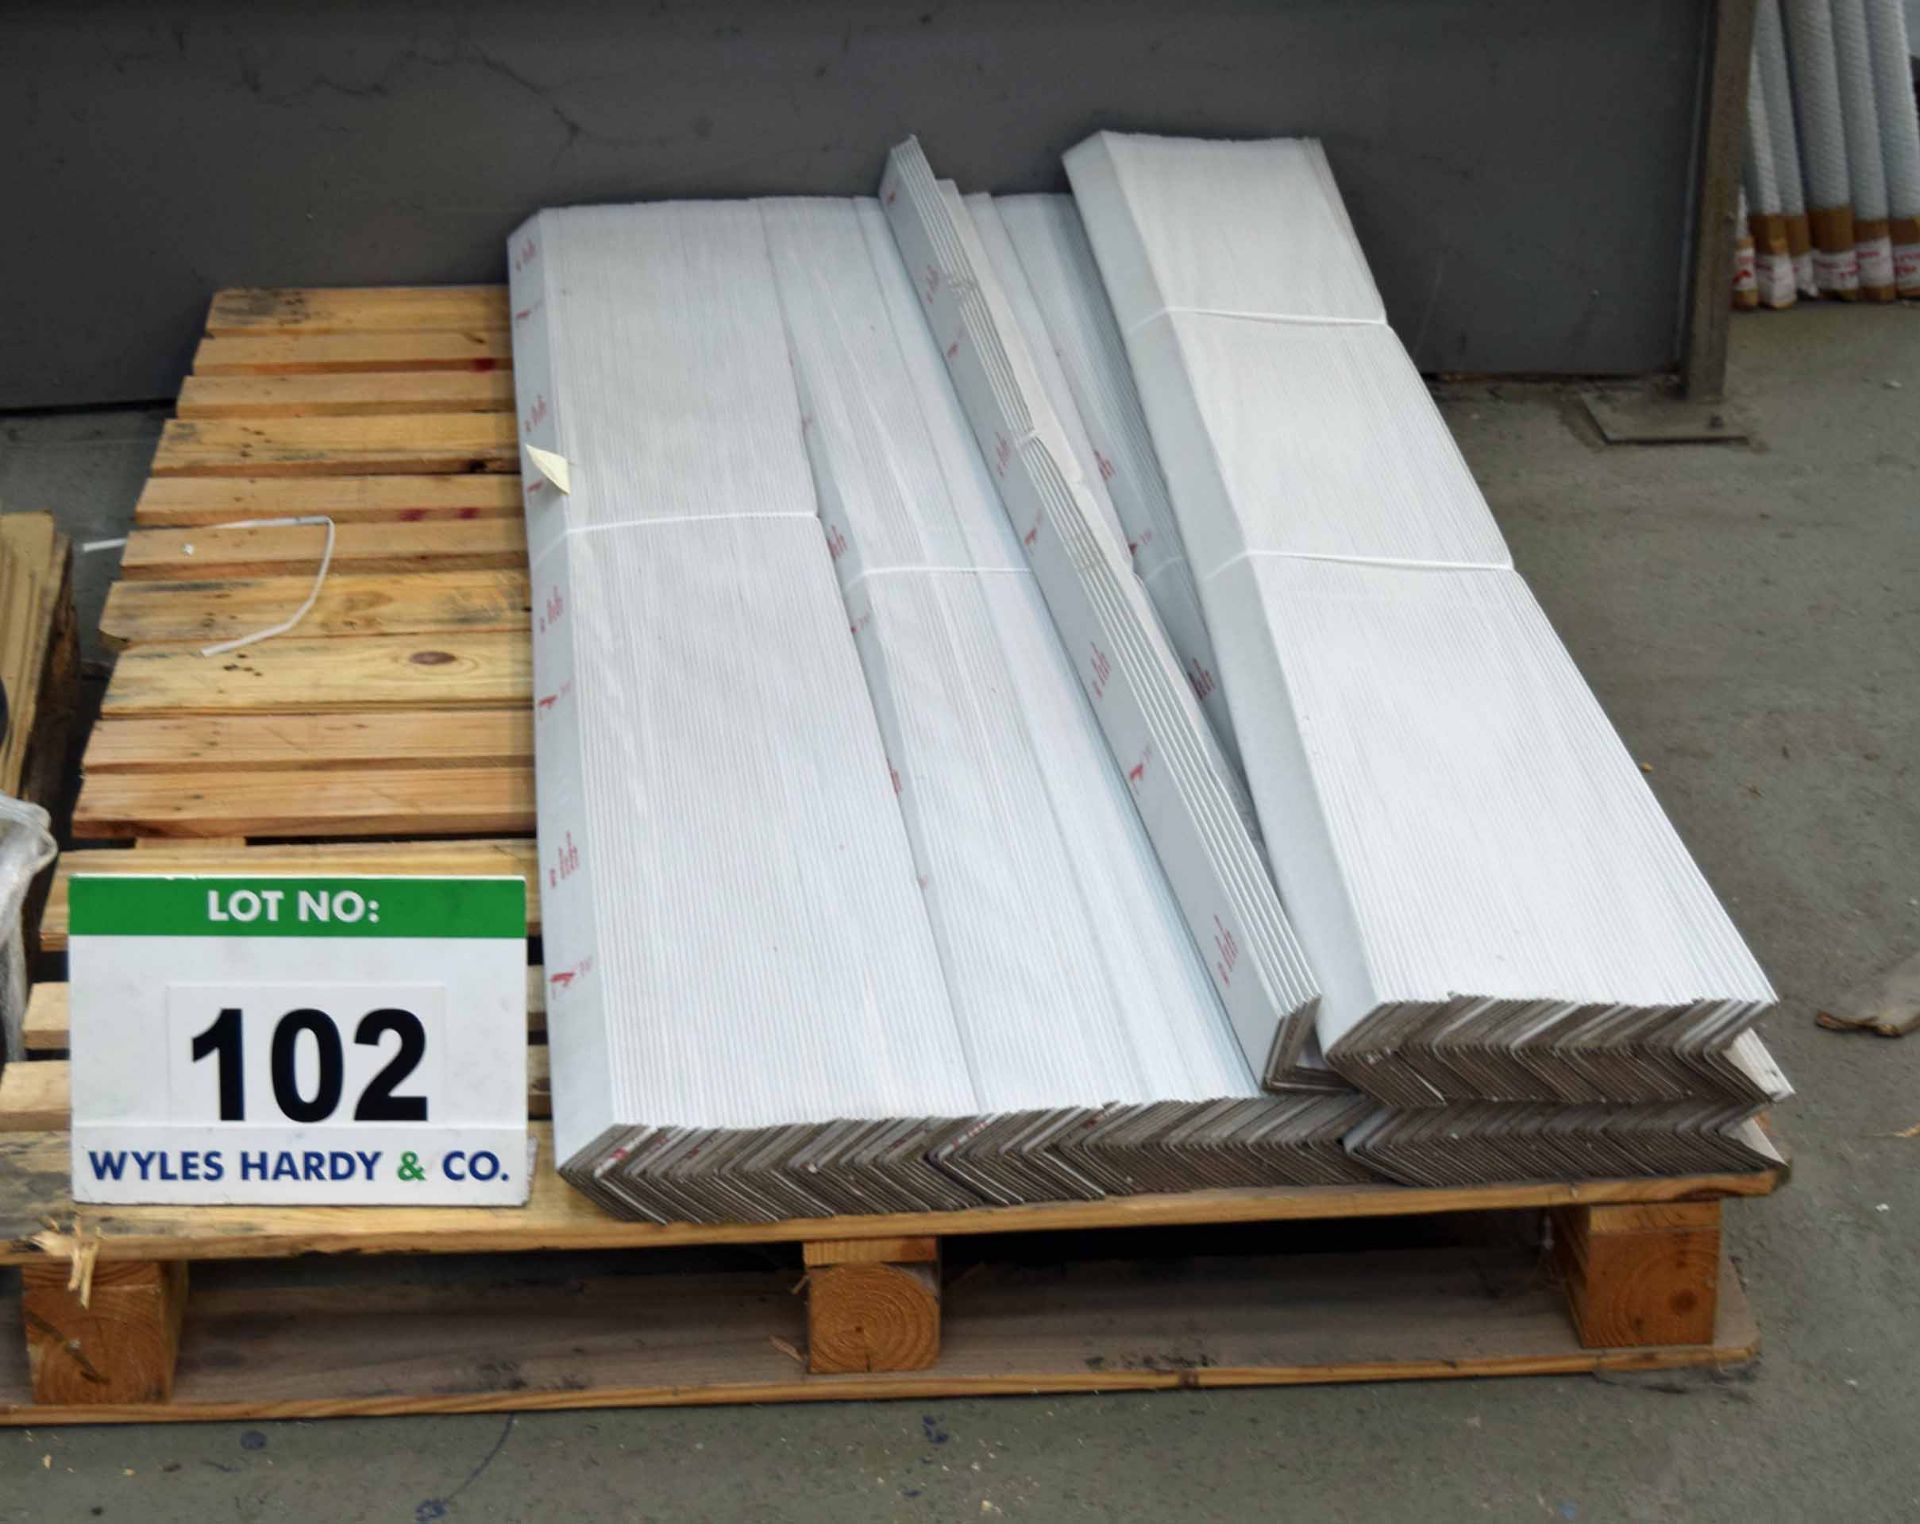 A Pallet of Protective Corners, Off-Cuts and A Packing Bench (As Photographed)